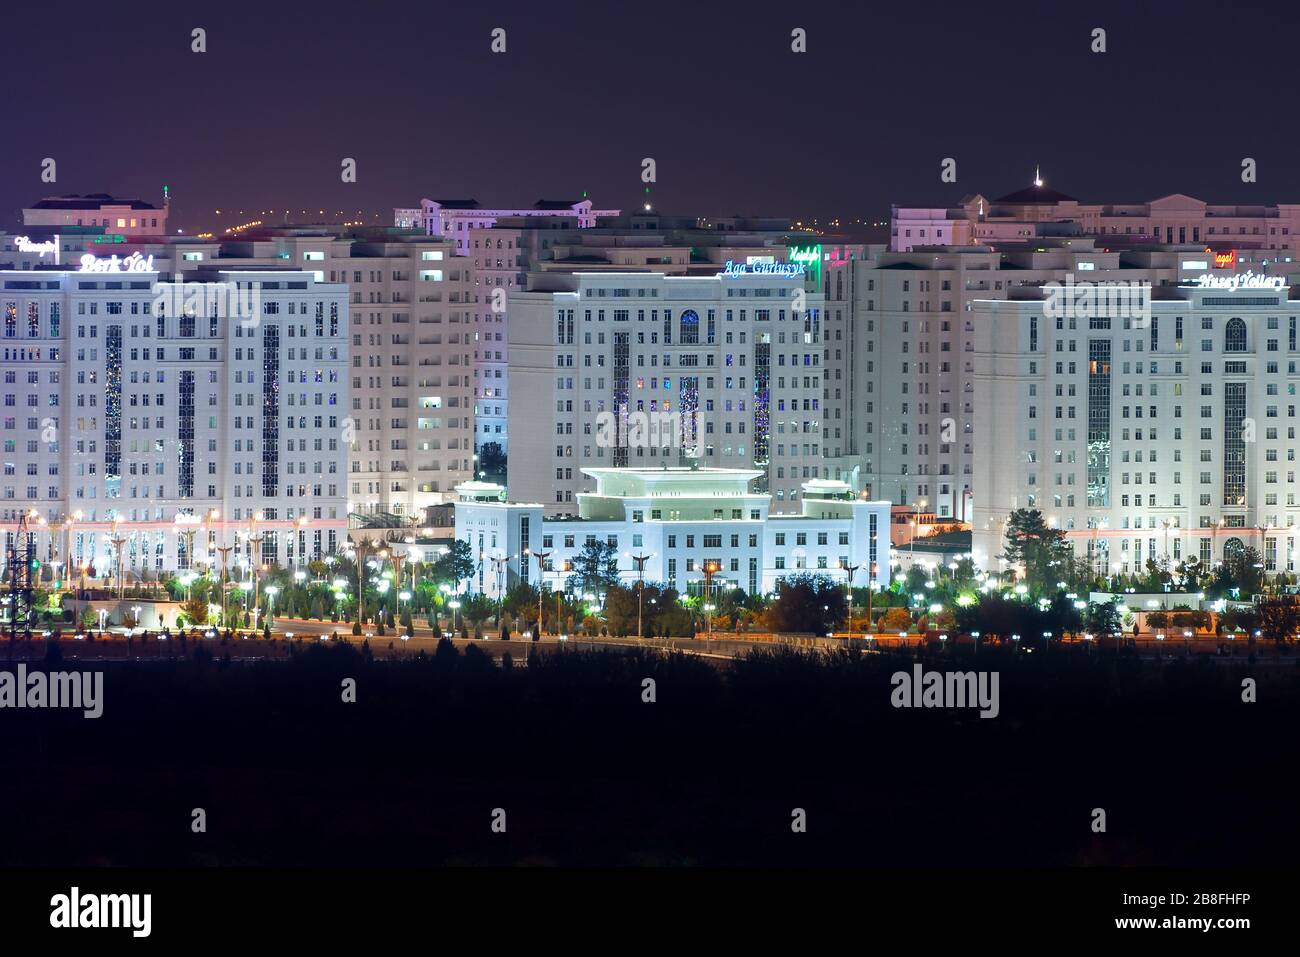 Ashgabat, Turkmenistan skyline illuminated at night. Famous as the White Marble City due to its multiple residential buildings of marble. Stock Photo